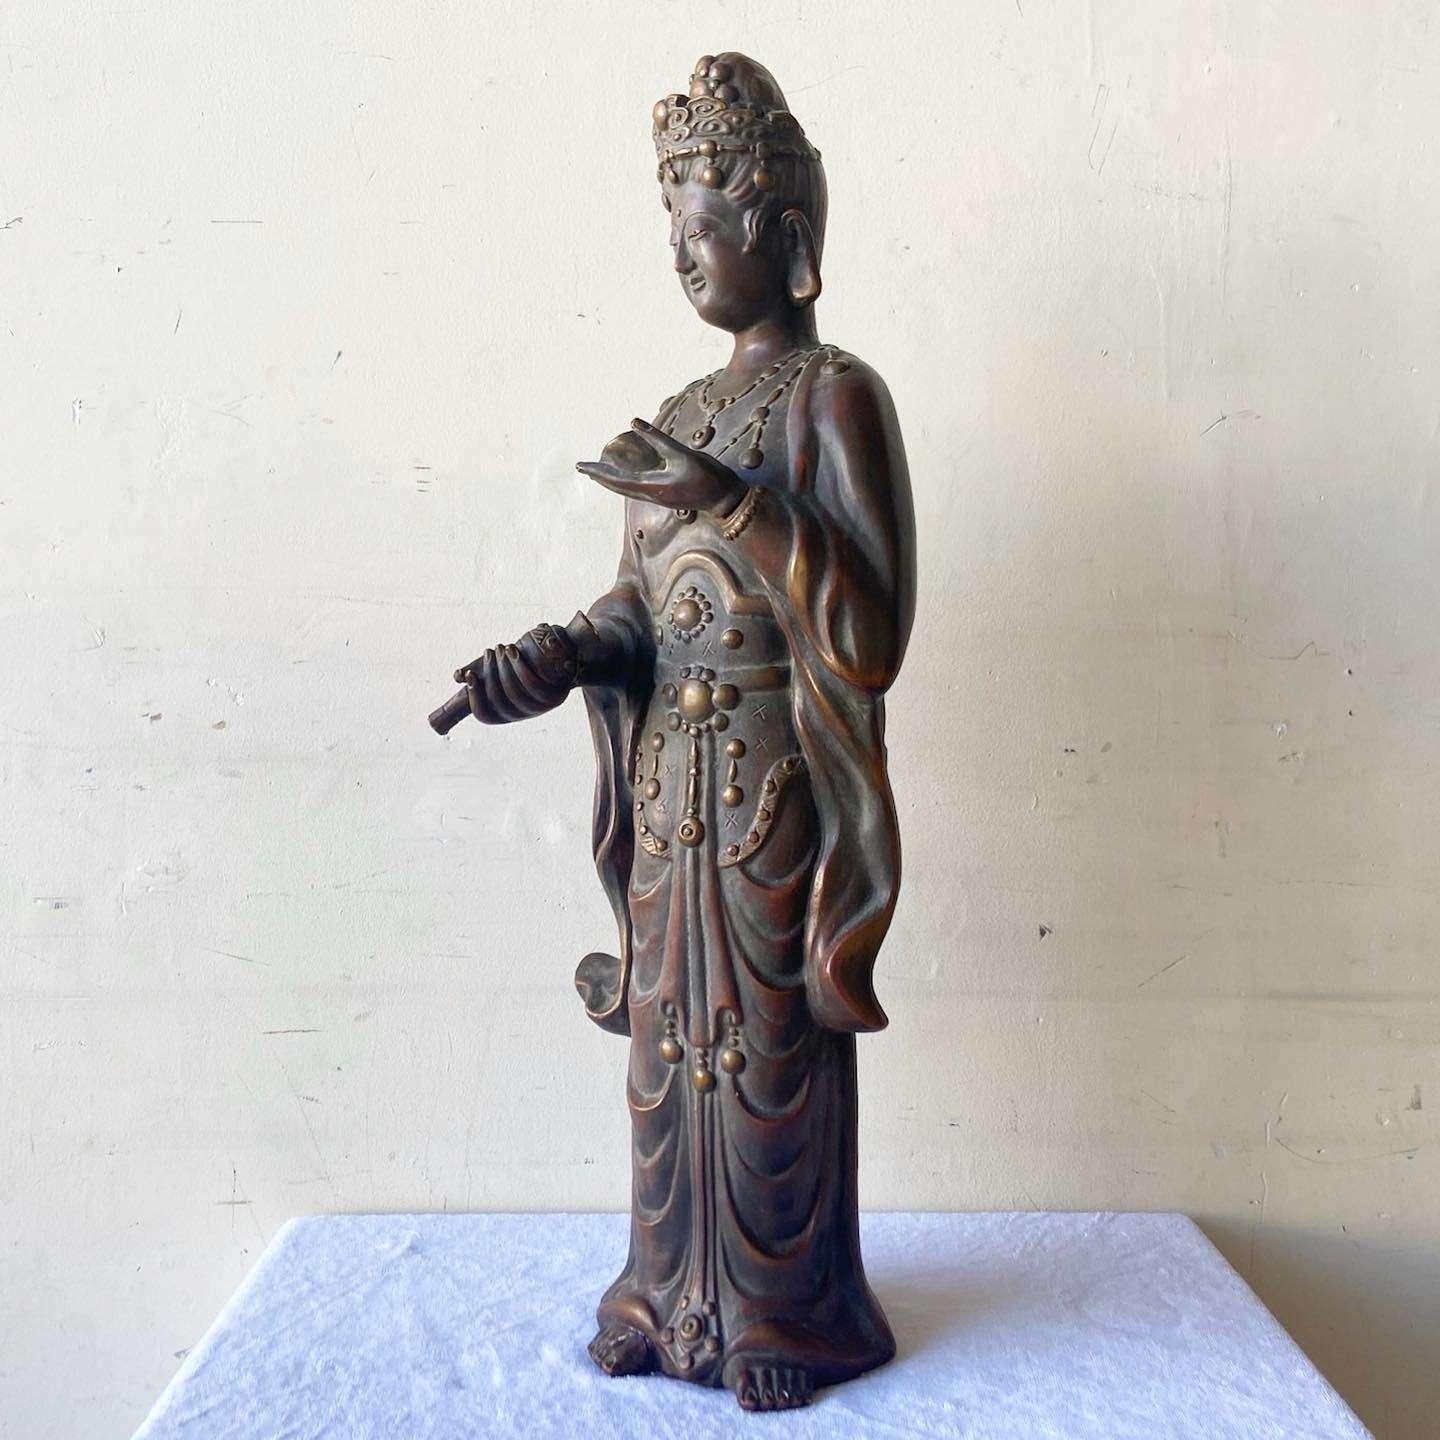 Vintage Chinese Ceramic Kwan-Yin Bodhisattva Sculpture In Good Condition For Sale In Delray Beach, FL